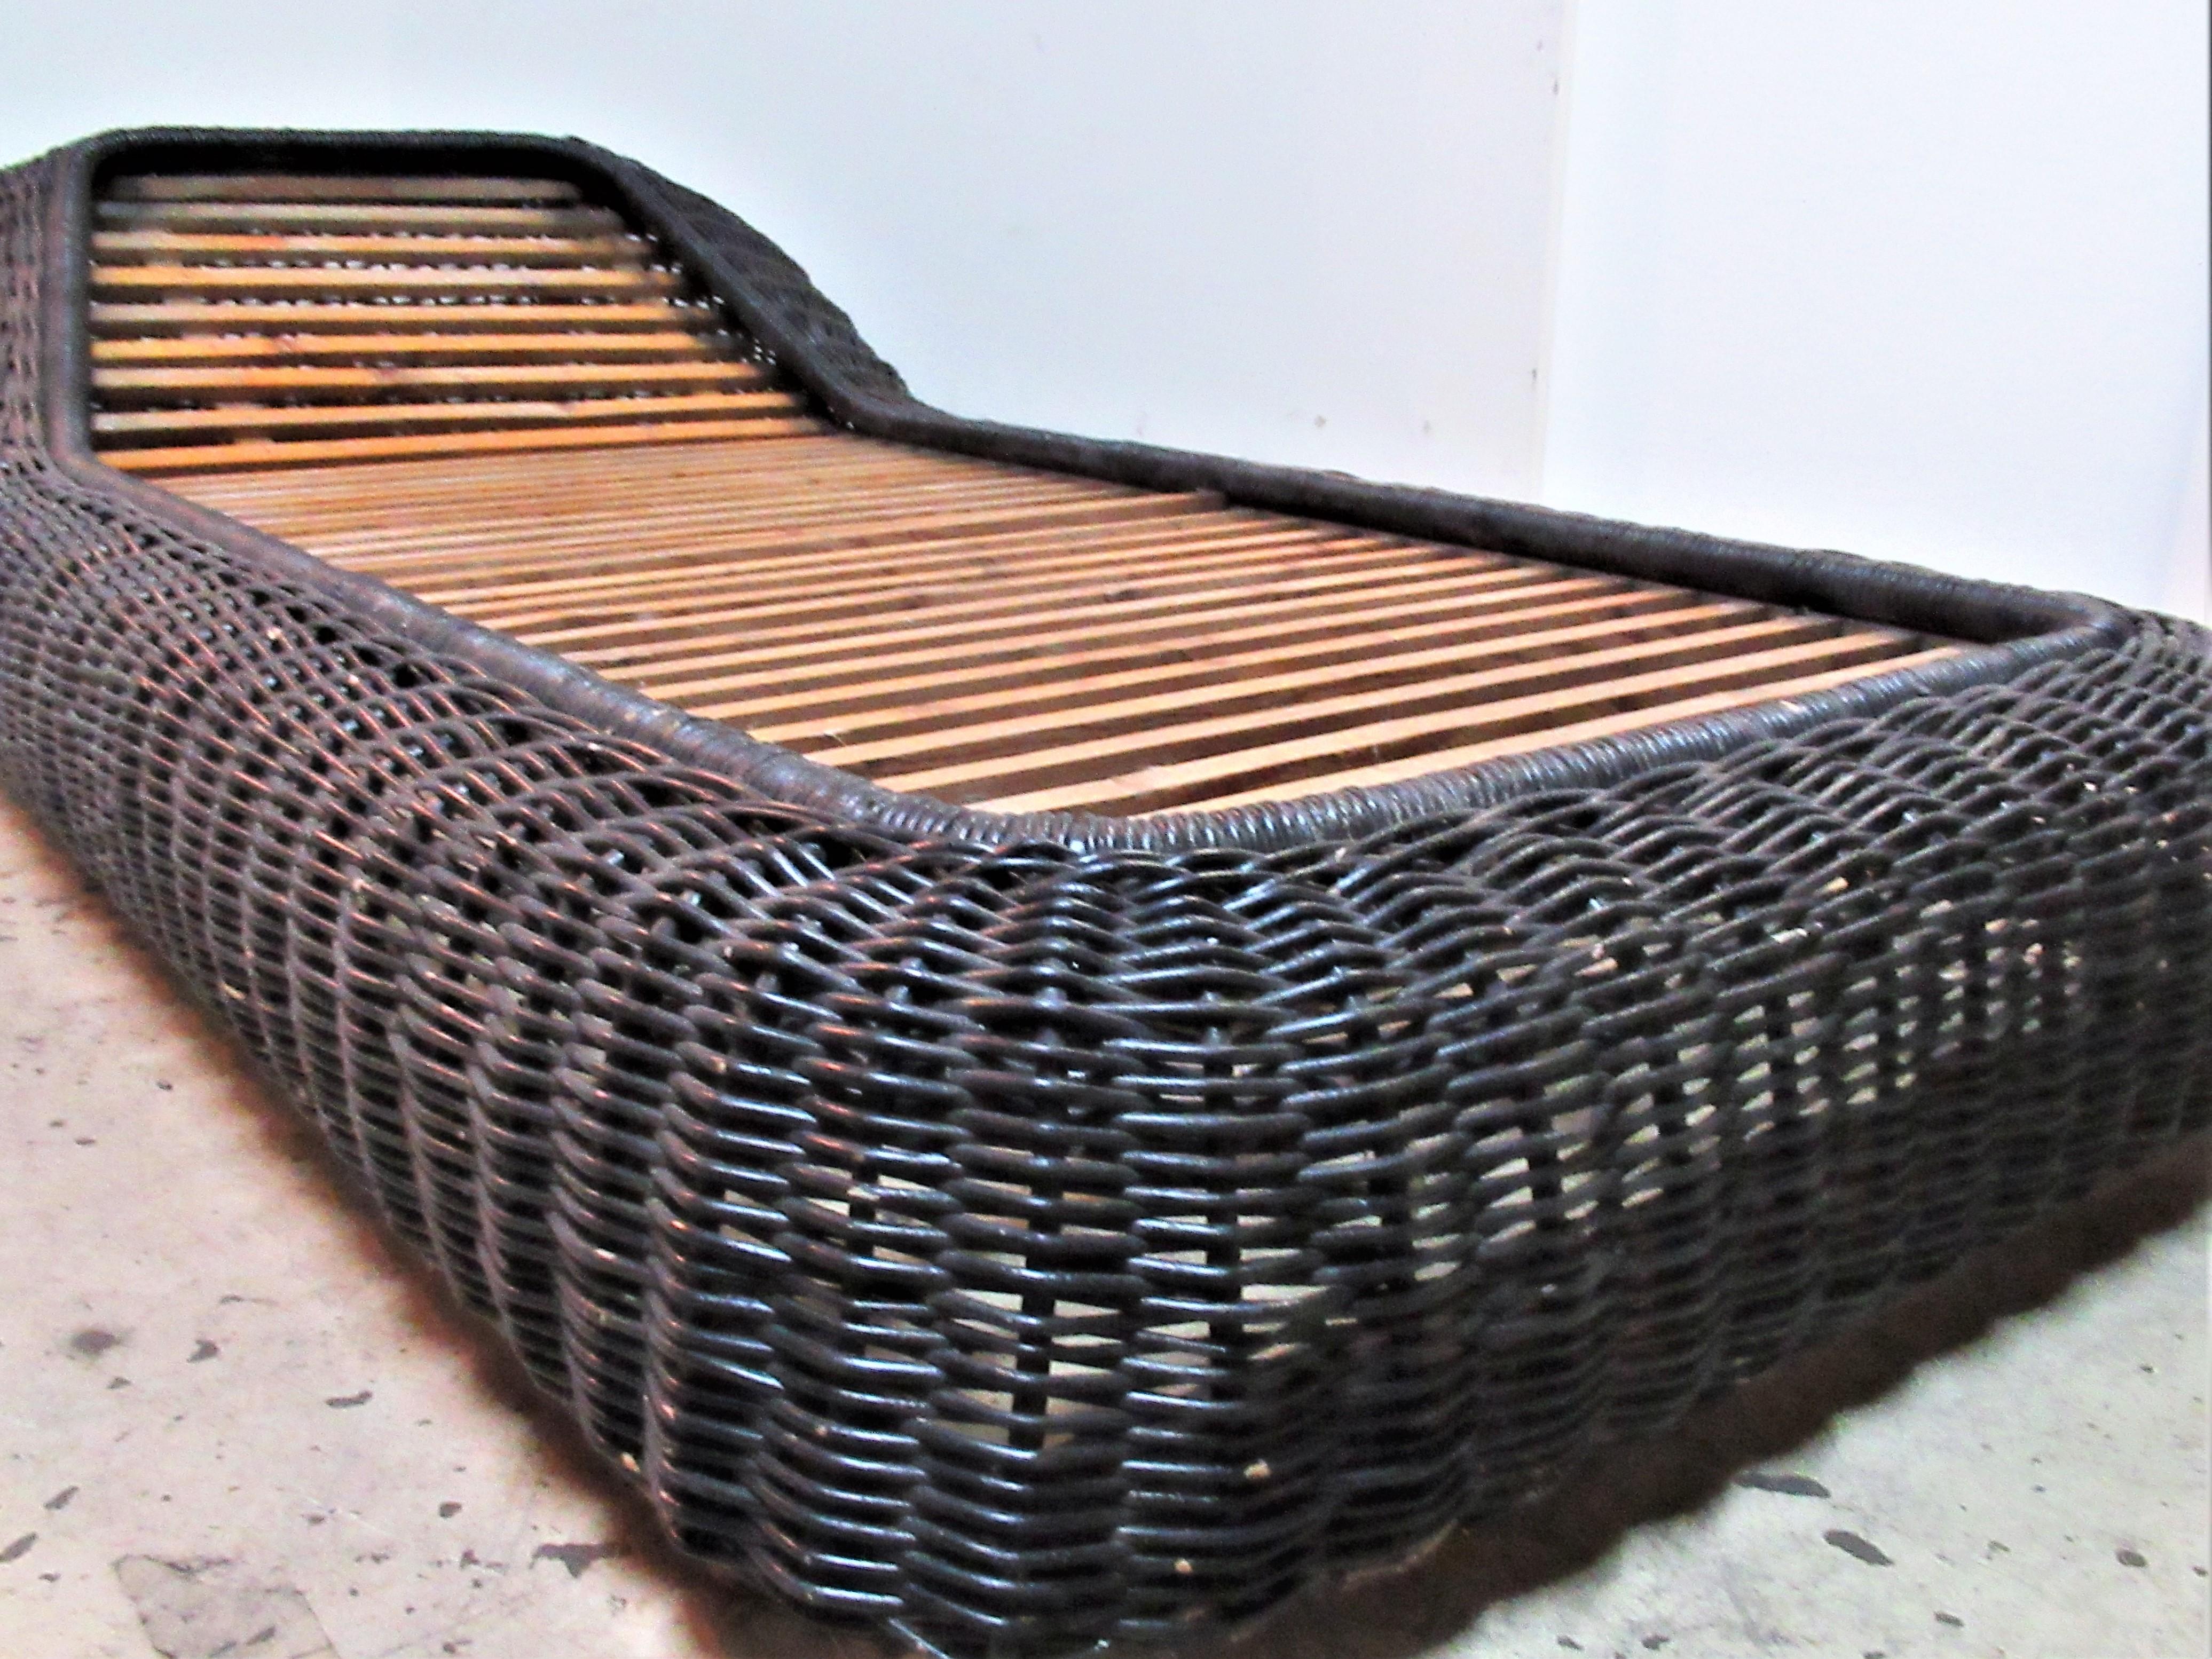    Vivai Del Sud Wicker Chaise Lounge, Italy 1970's For Sale 2